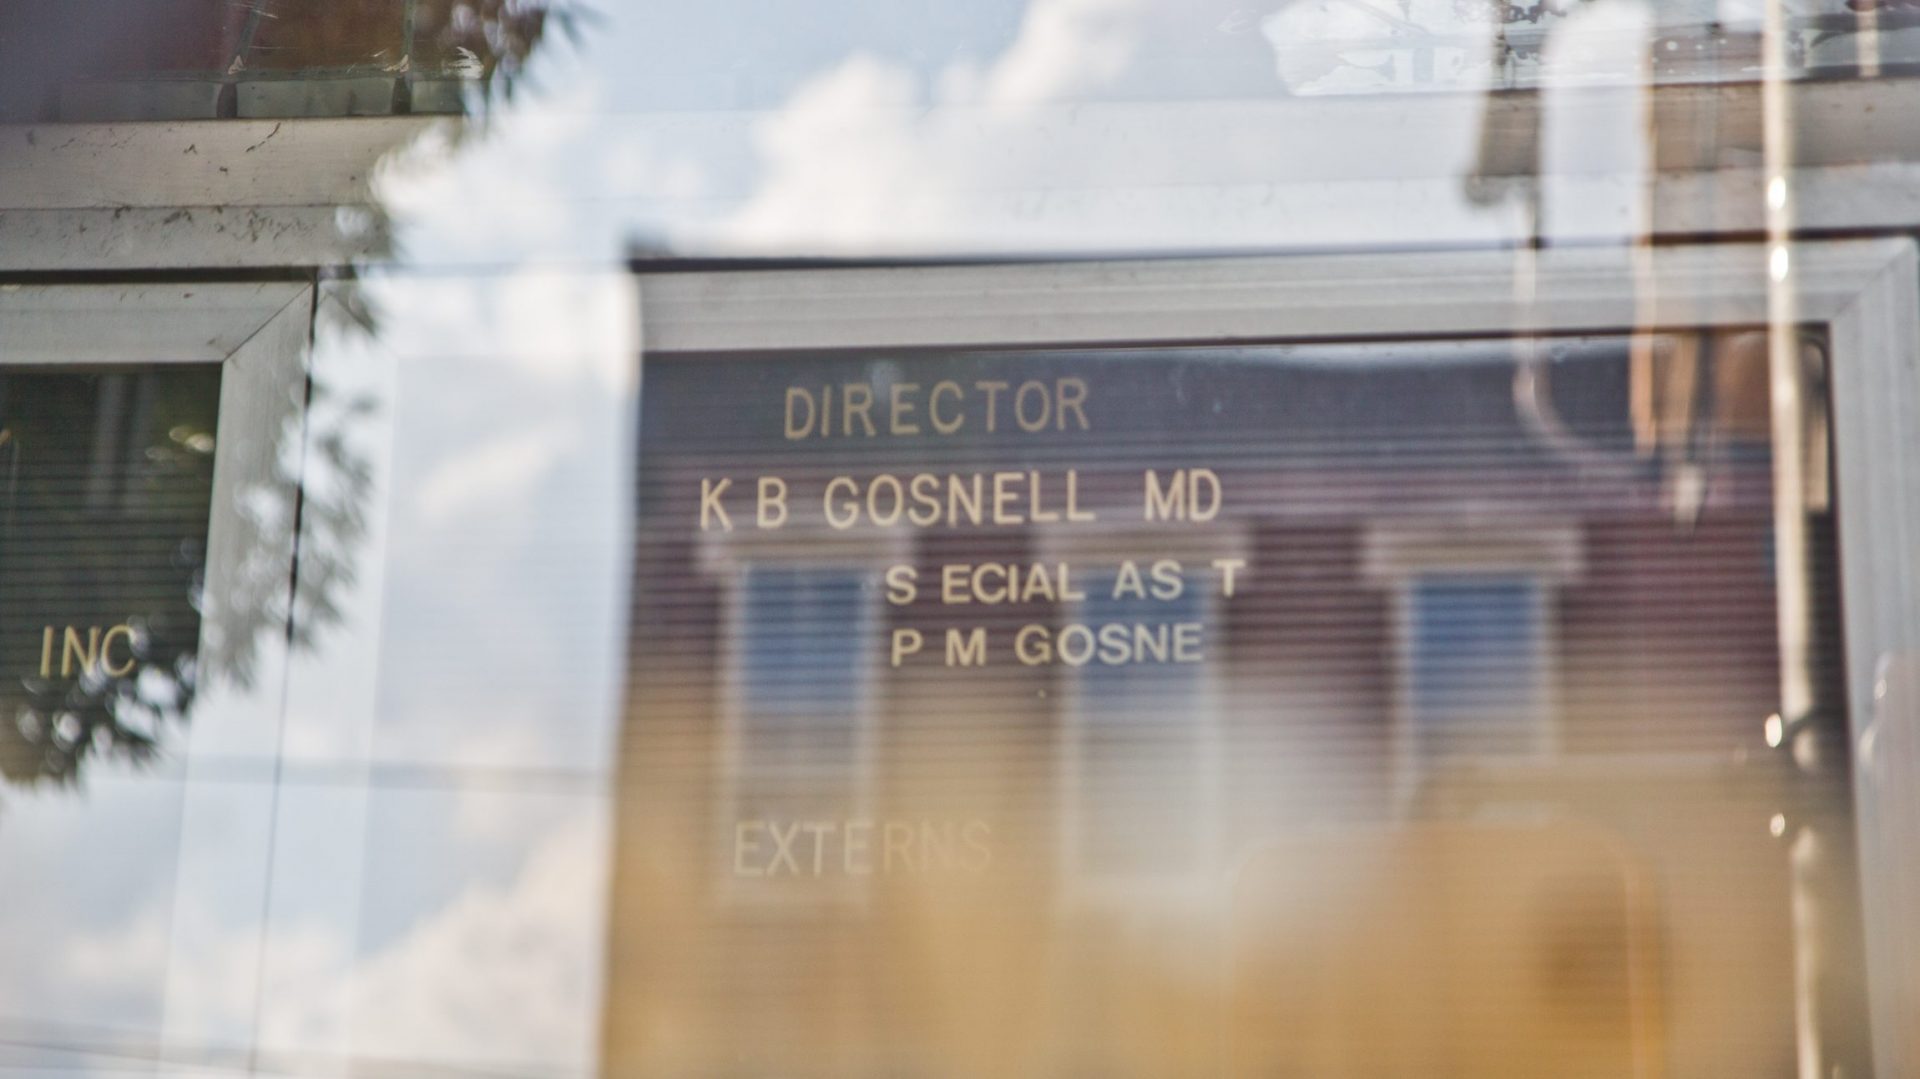 The name of convicted murderer Kermit Gosnell still adorns the door of the former clinic in West Philadelphia.